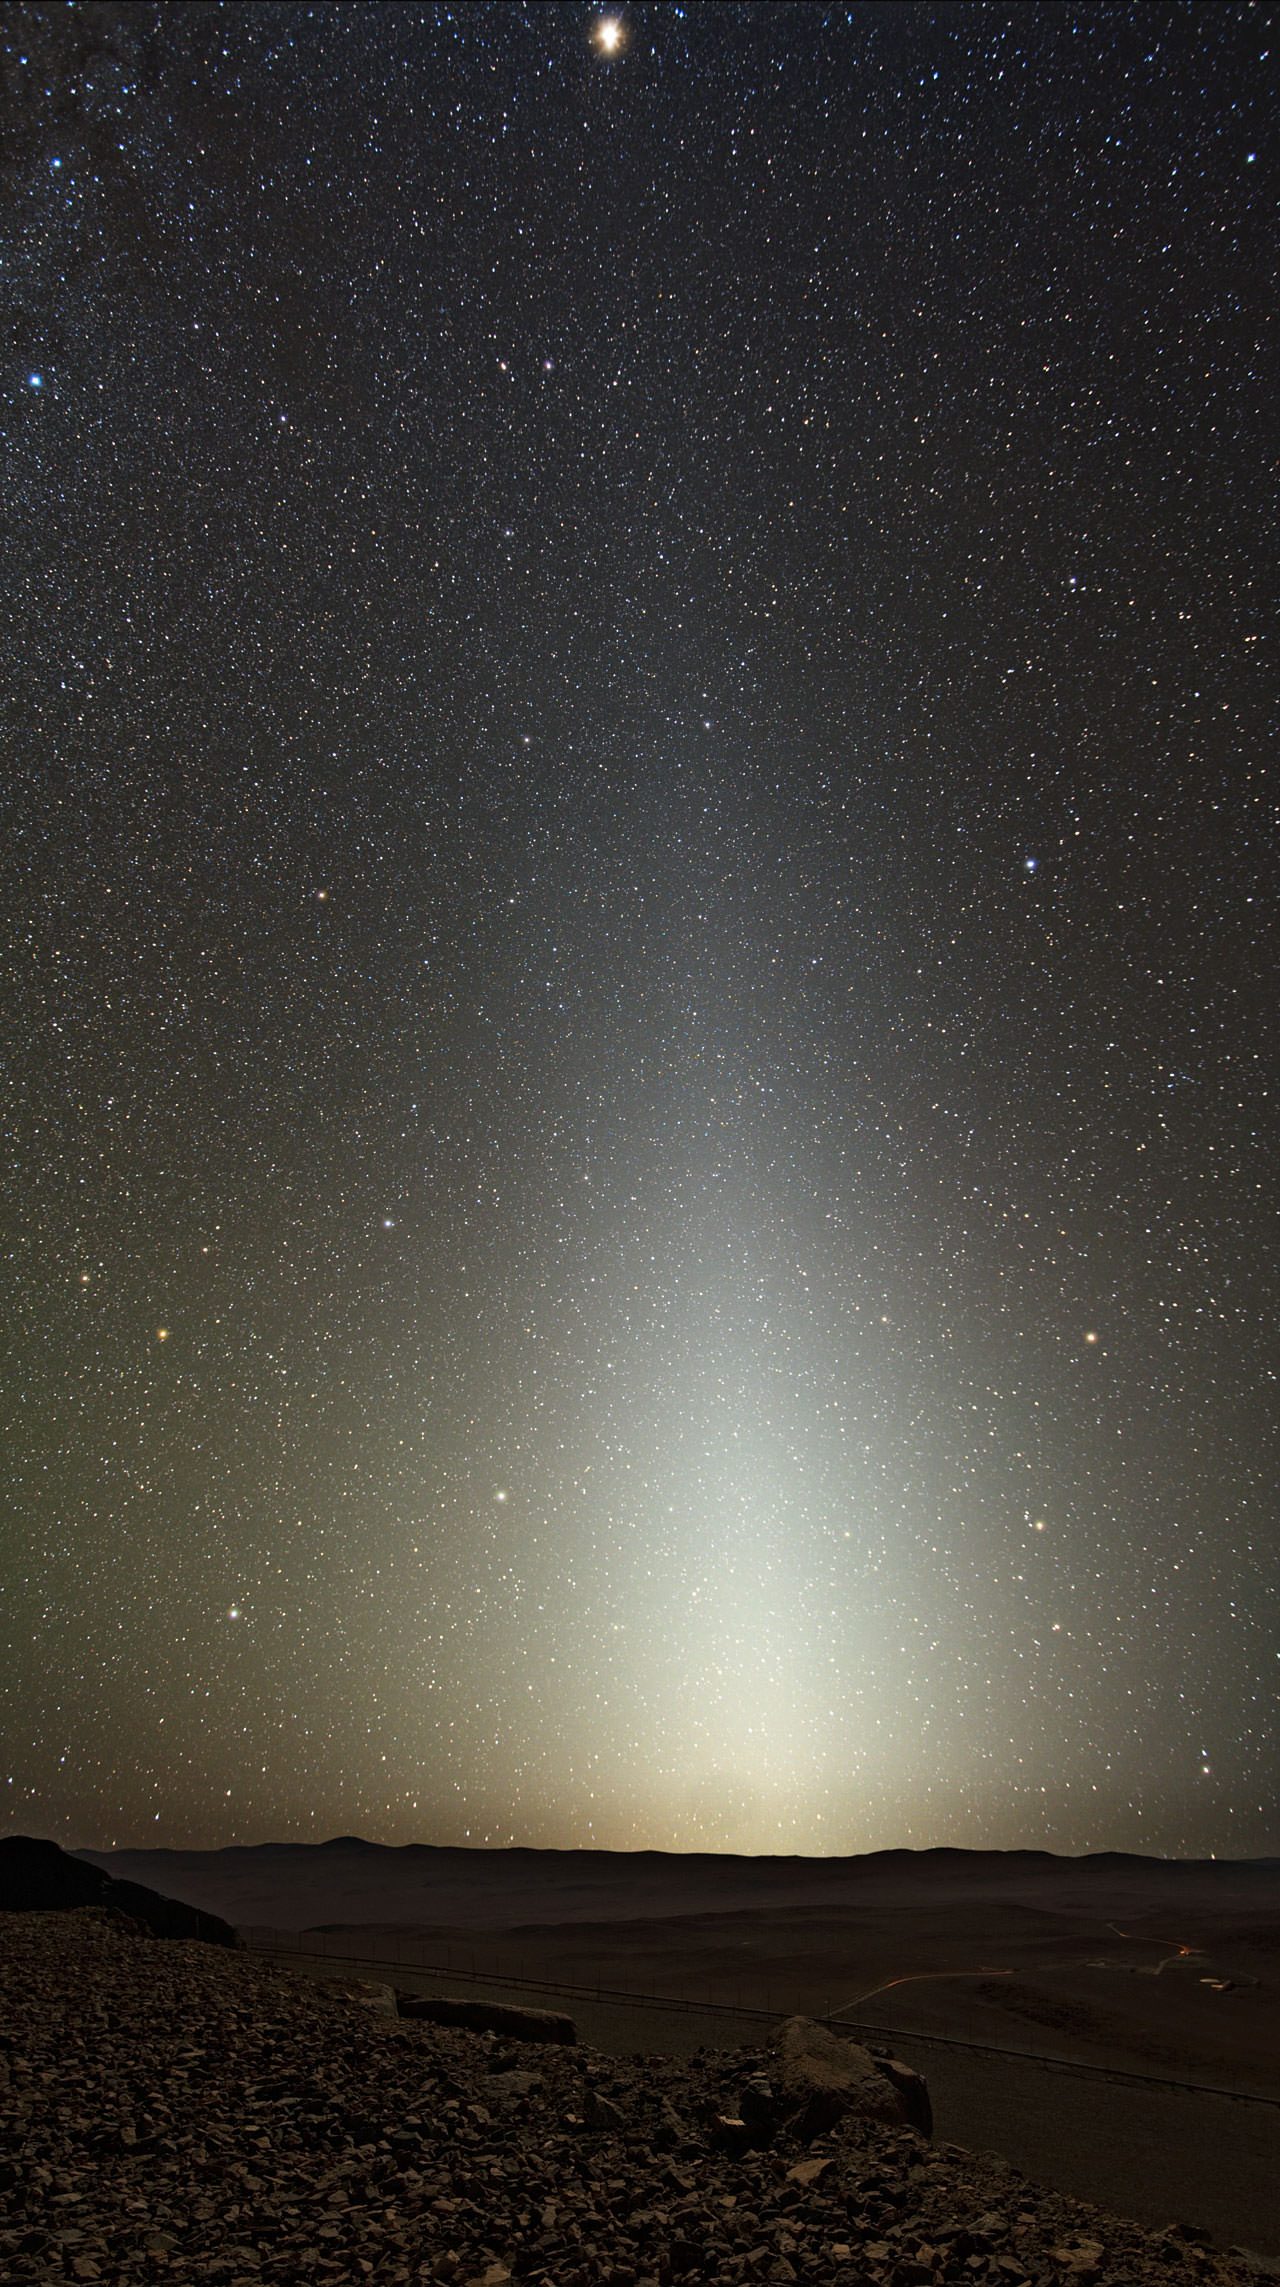 A starry sky, with a bright column due to zodiacal light, illuminates the desert landscape around Cerro Paranal, home to ESO's Very Large Telescope (VLT).